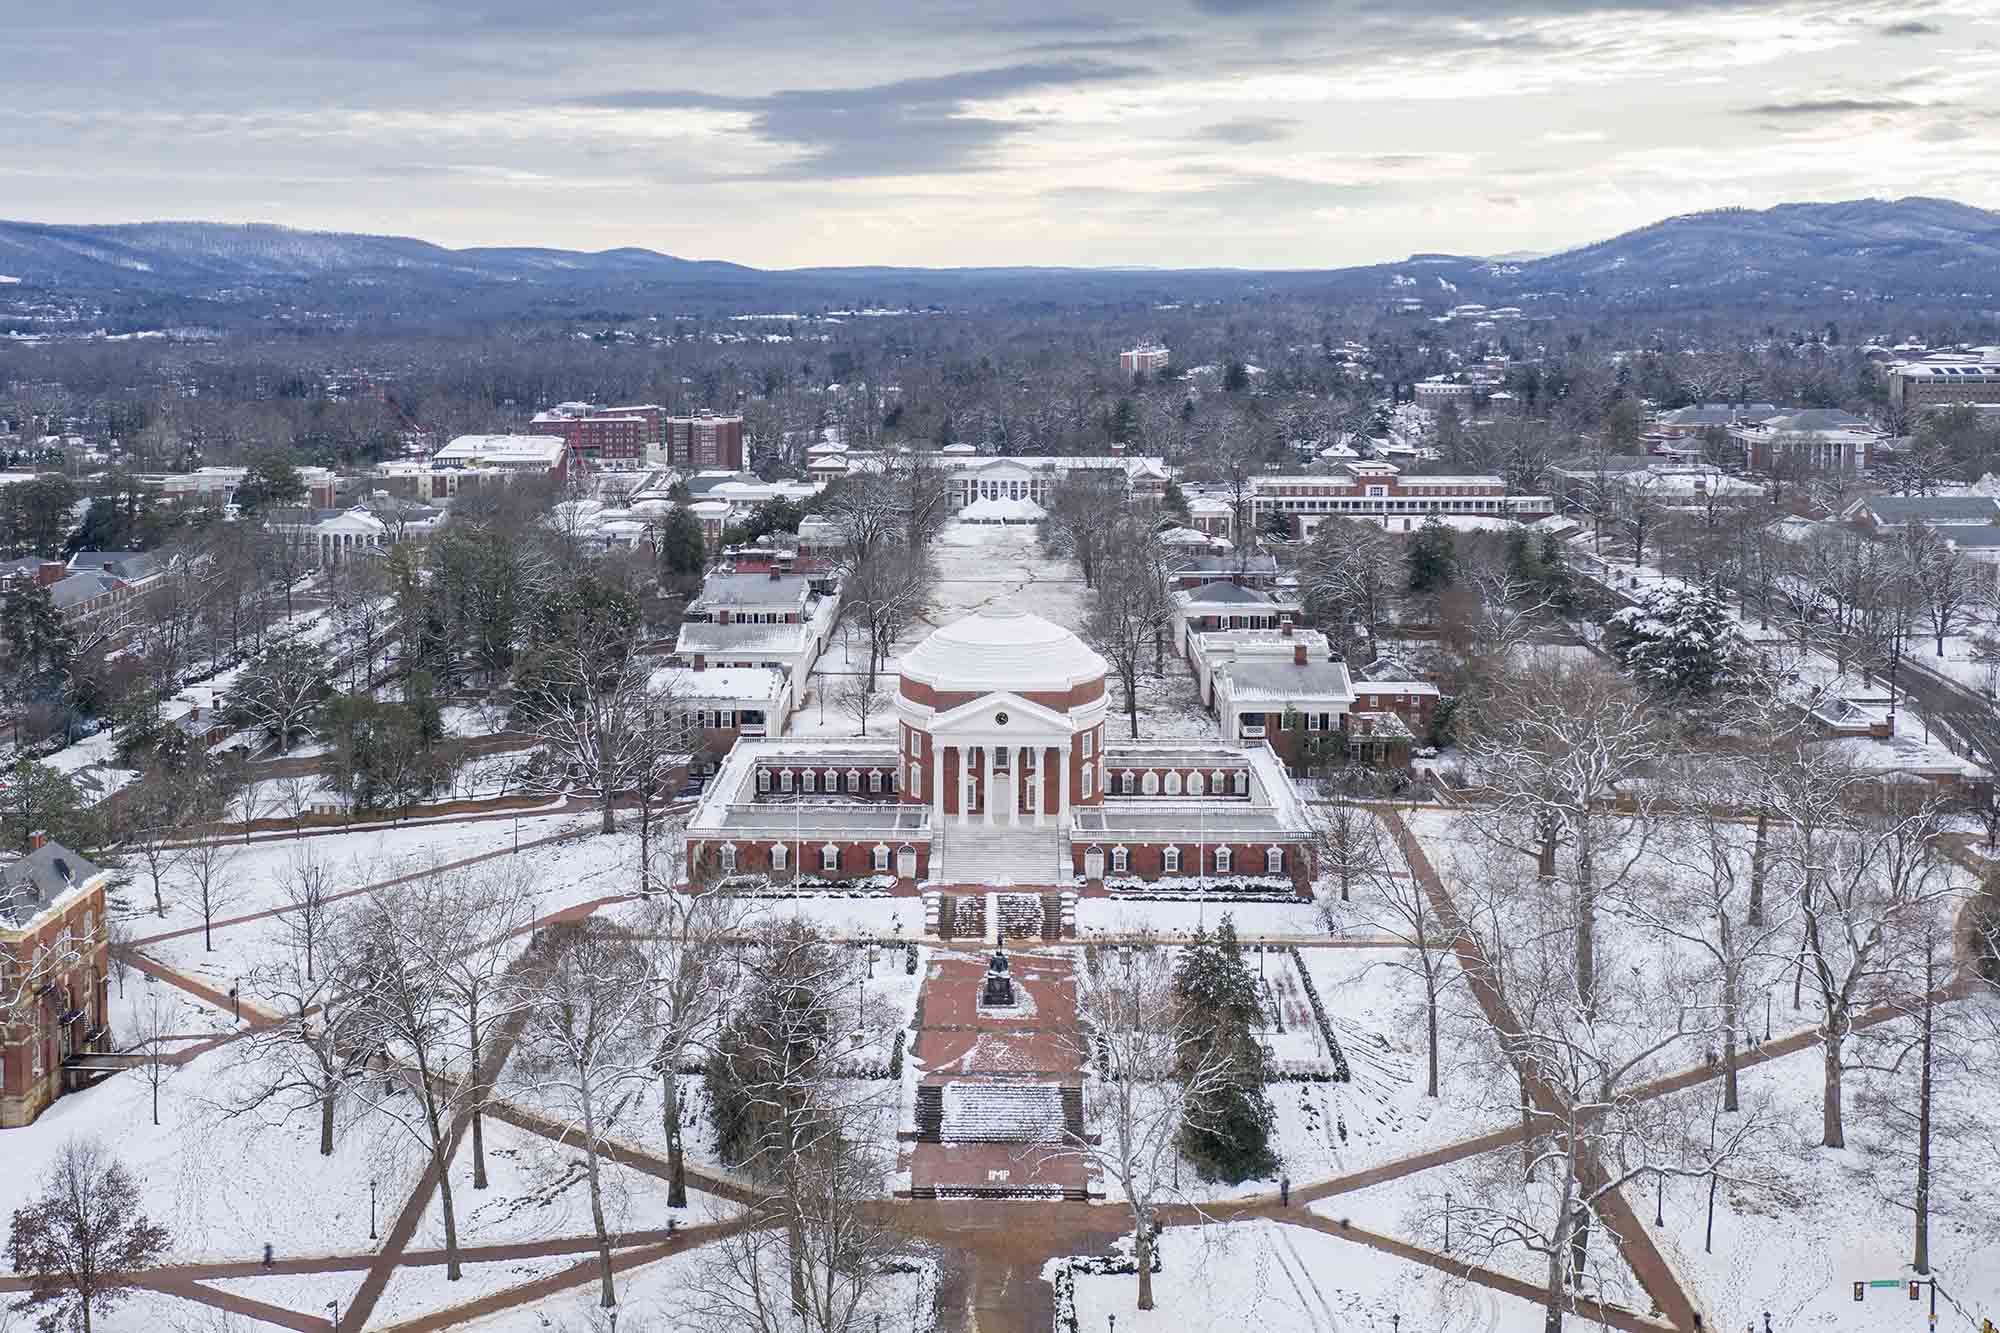 Ariel view of the Rotunda in the snow